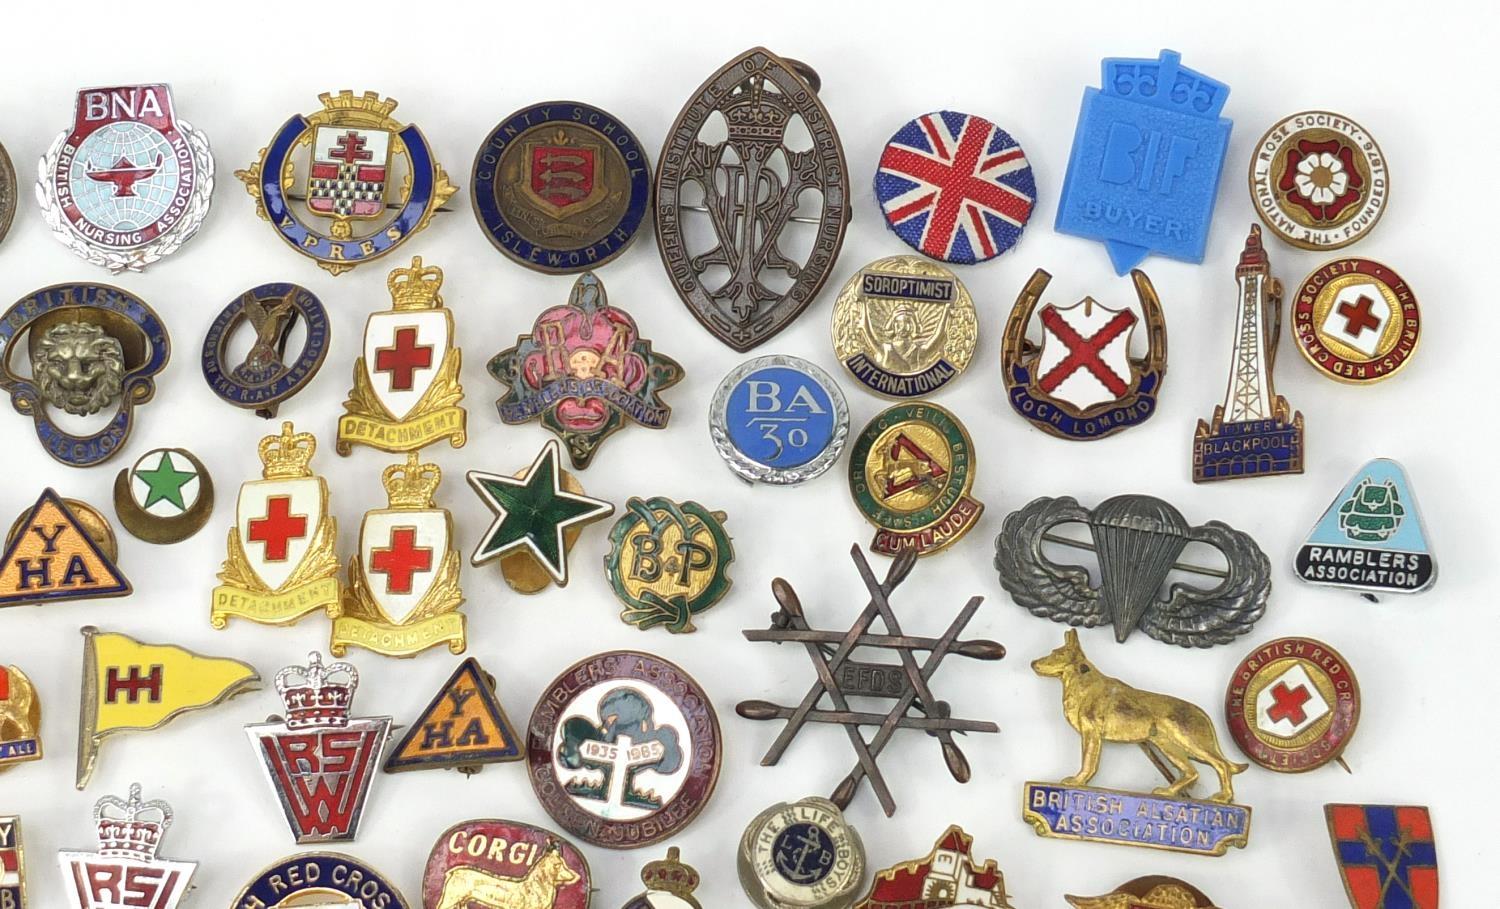 Vintage badges and lapels, some military interest including American World War II sterling silver - Image 3 of 10